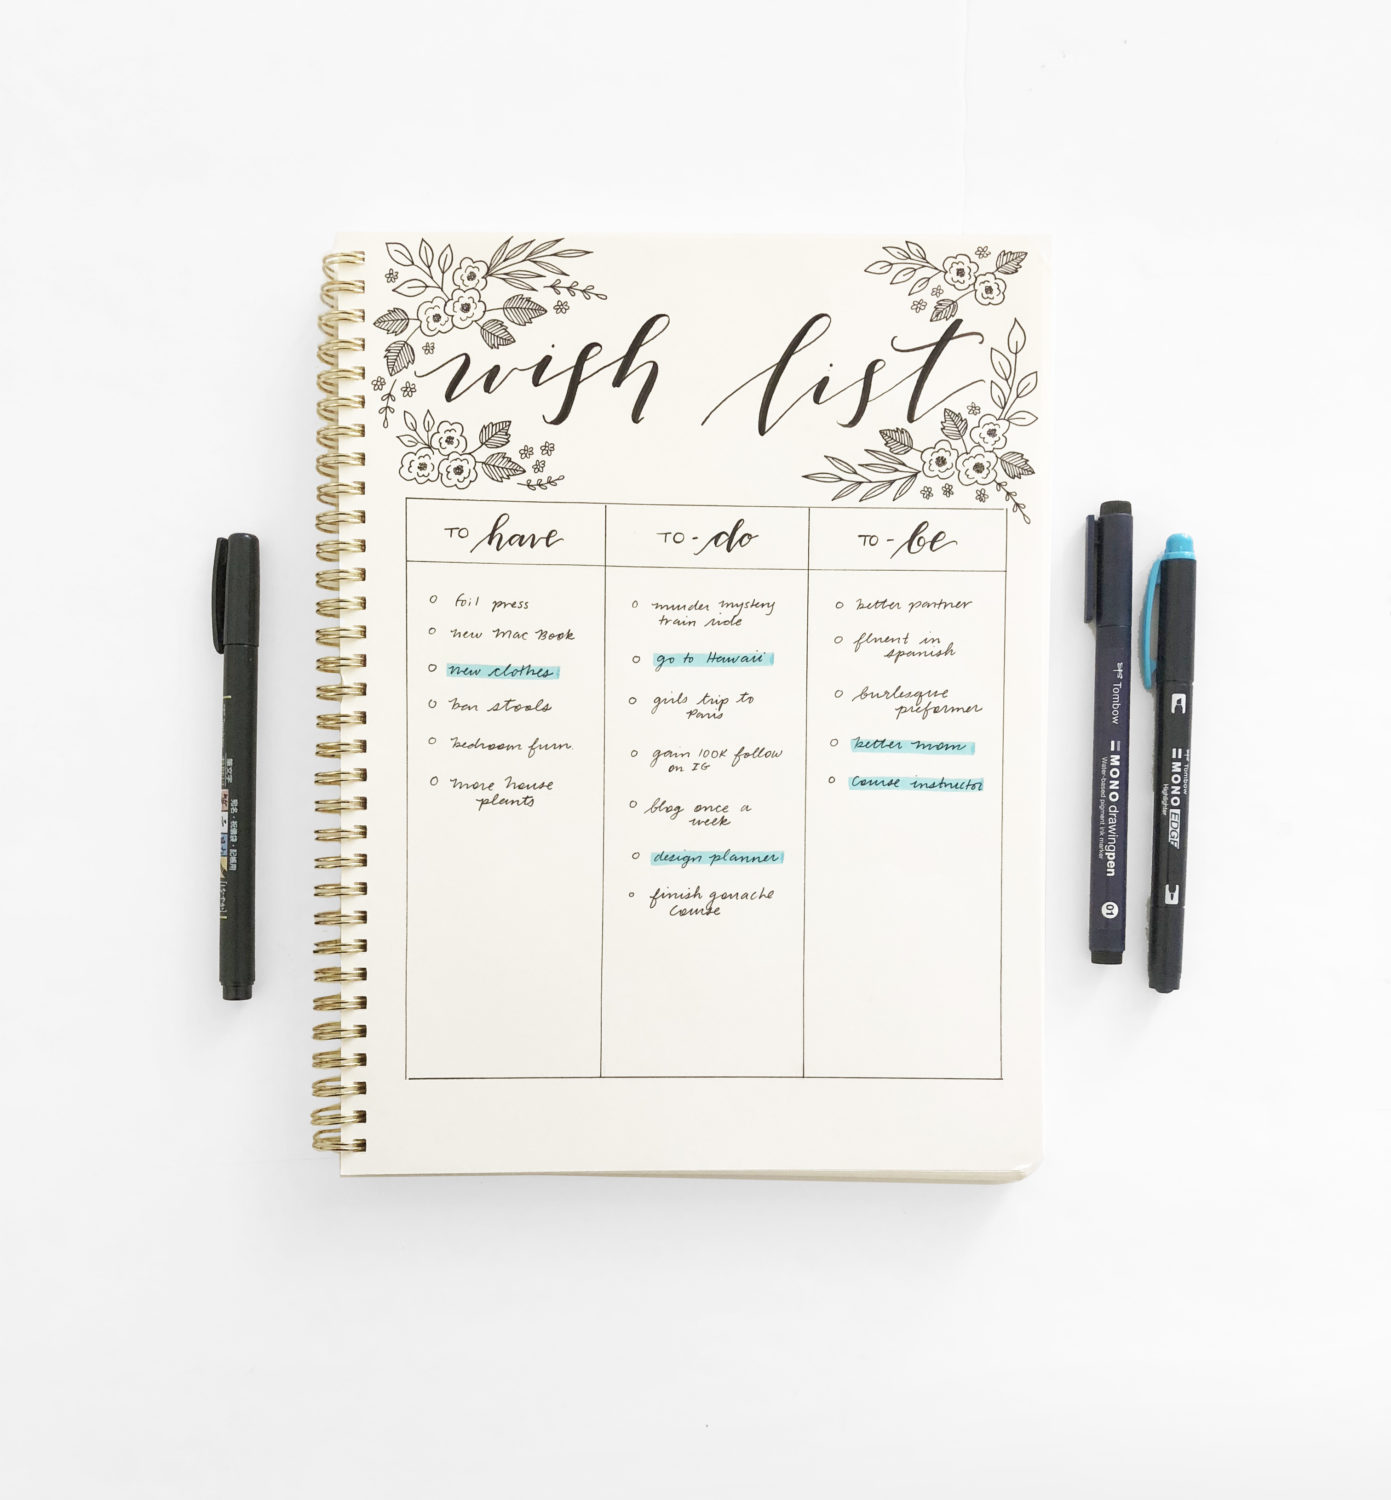 3 Ways to Use your Webster's Pages Notebook for Planning